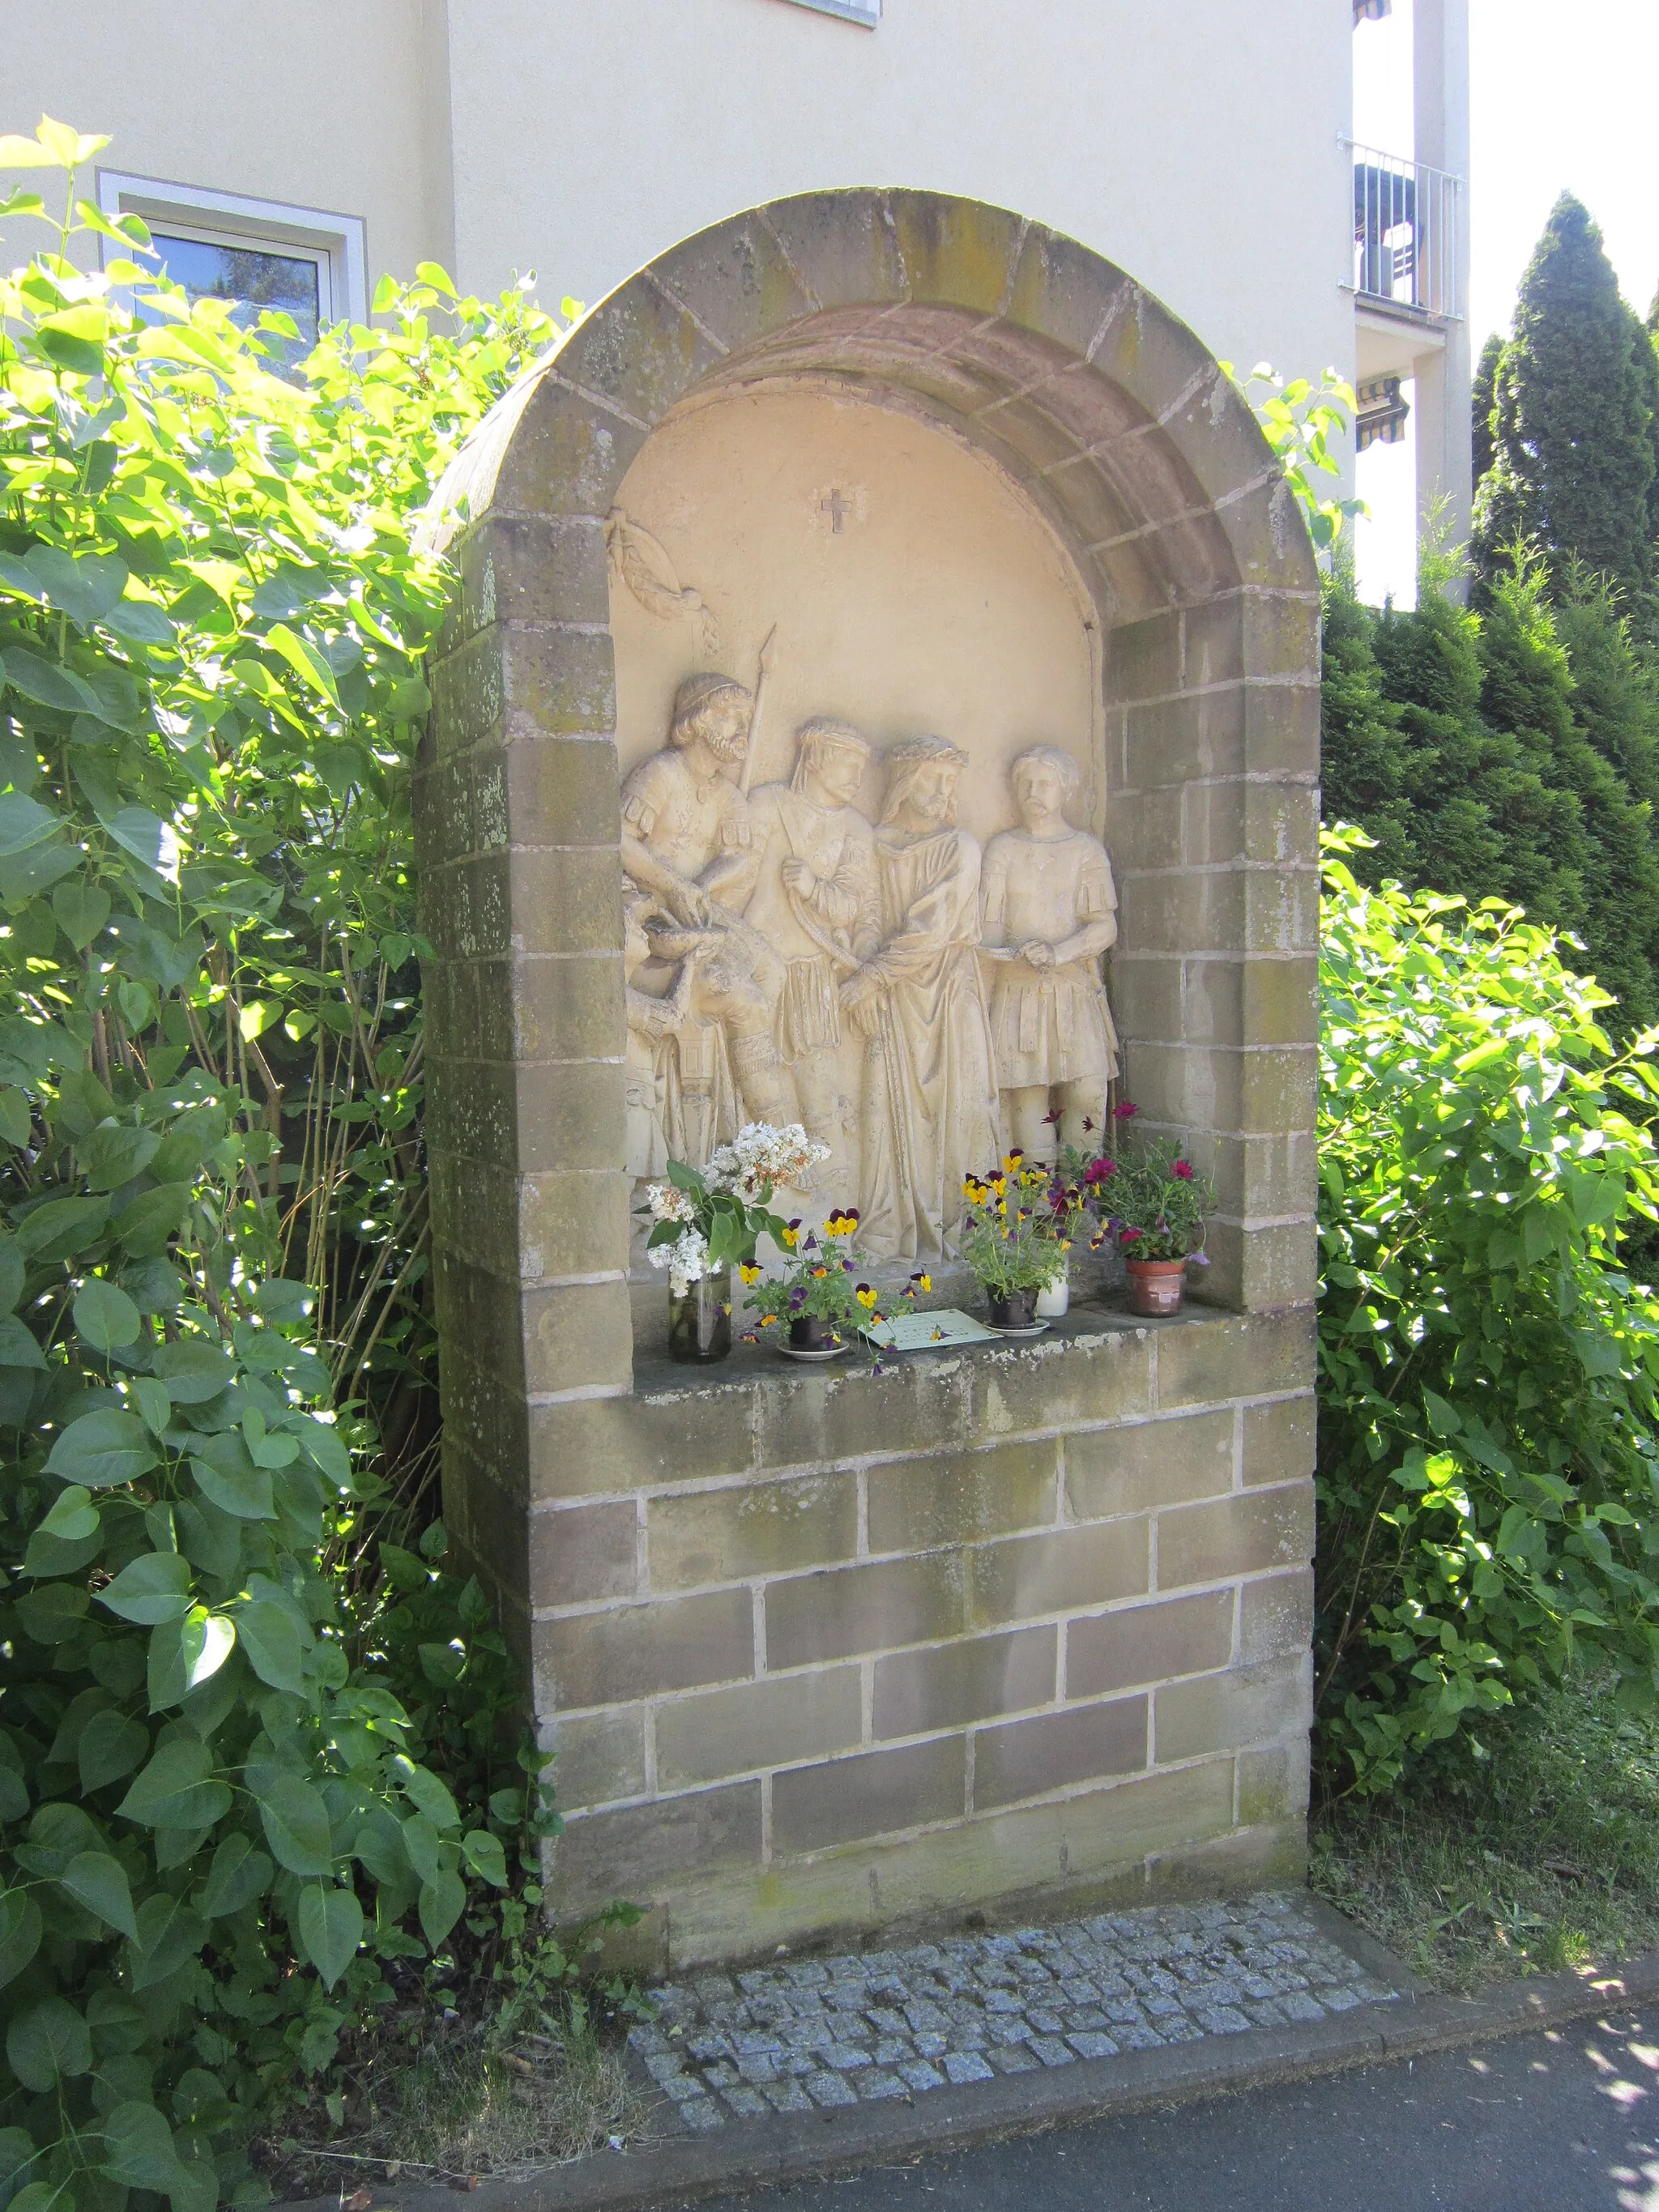 Photo showing: 1st Station of the Way of the Cross of the "Stationsberg" in the German spa of Bad Kissingen in Lower Franconia (Bavaria).